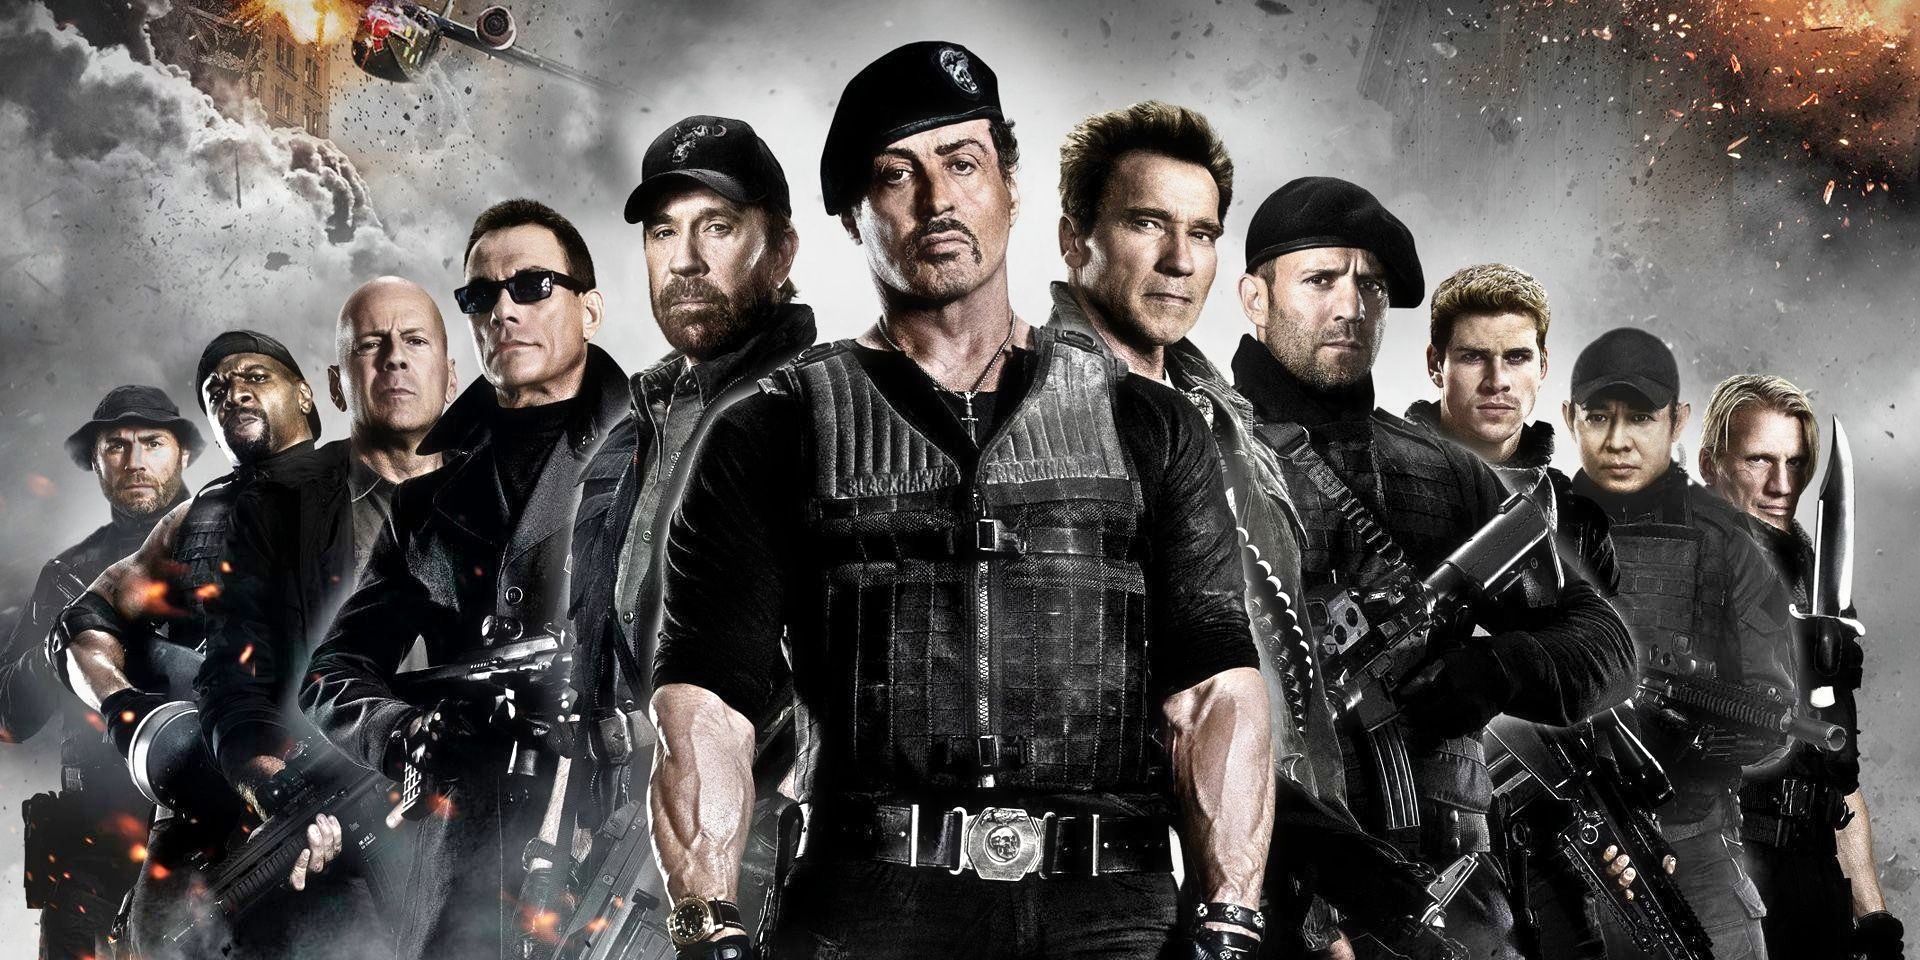 The Expendables Broke Arnold Schwarzenegger’s Sequel Rule In The Worst Way